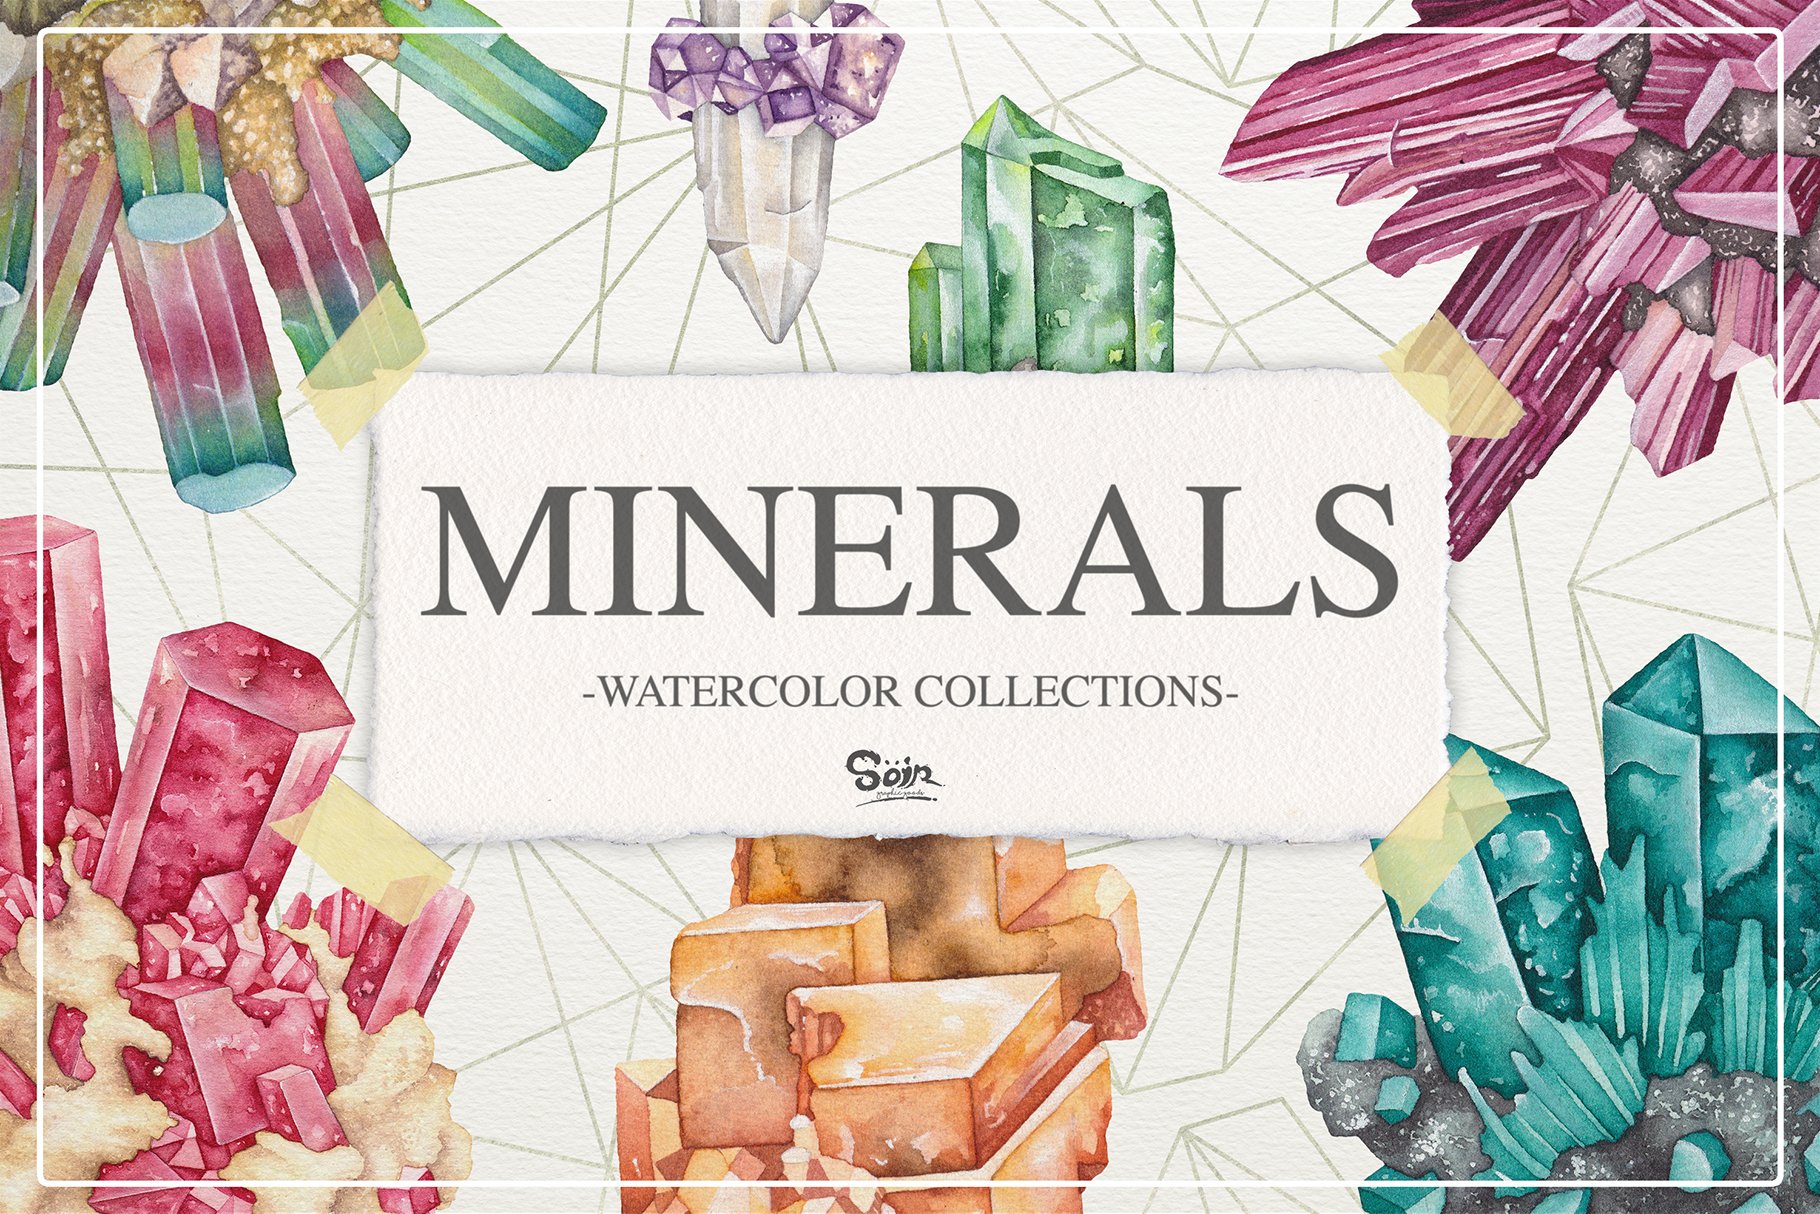 Minerals Watercolor cover image.